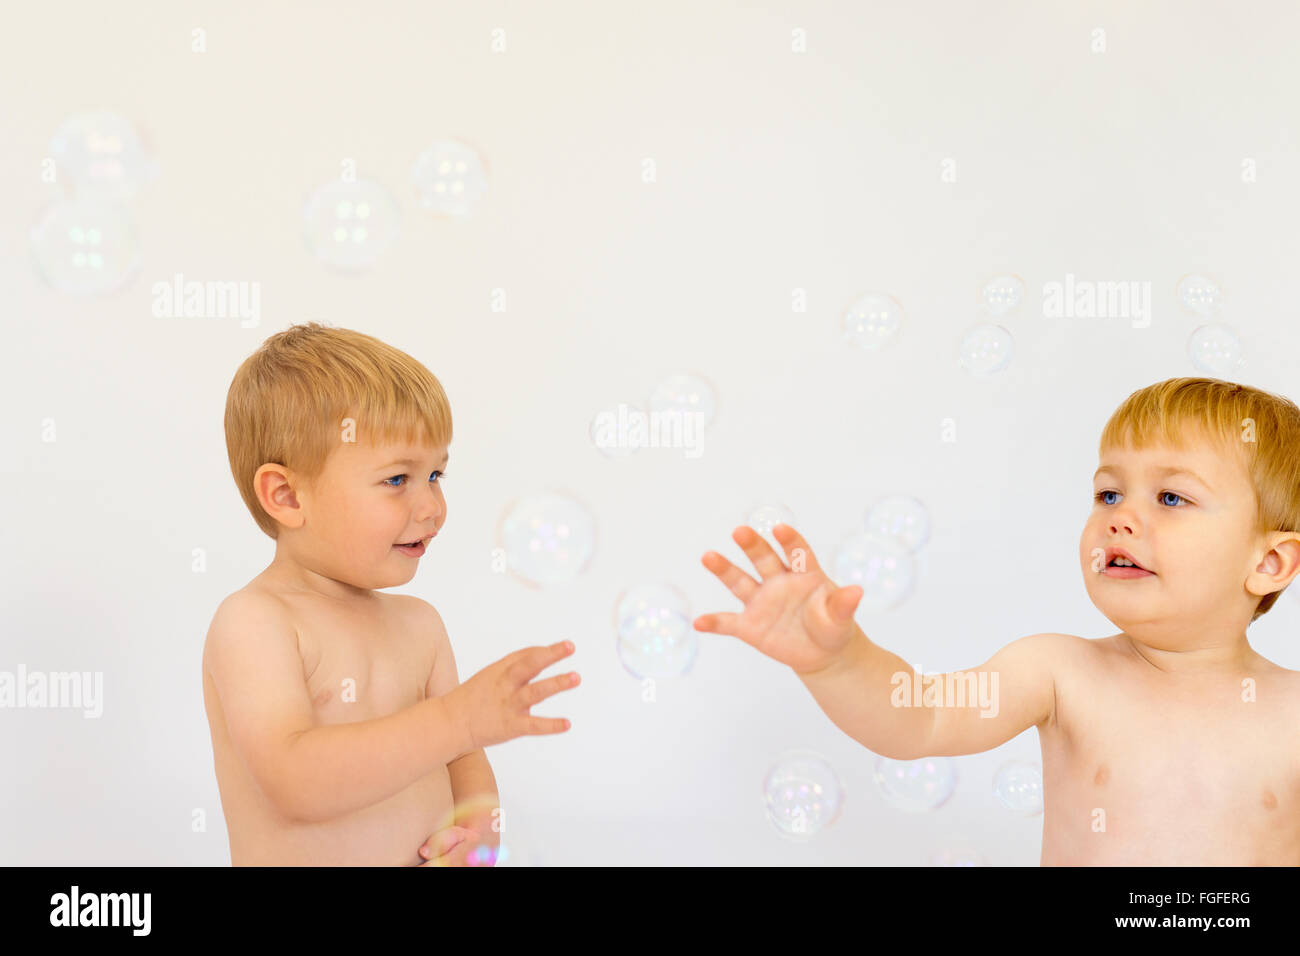 Identical twin boys reaching out to touch bubbles floating in the air Stock Photo